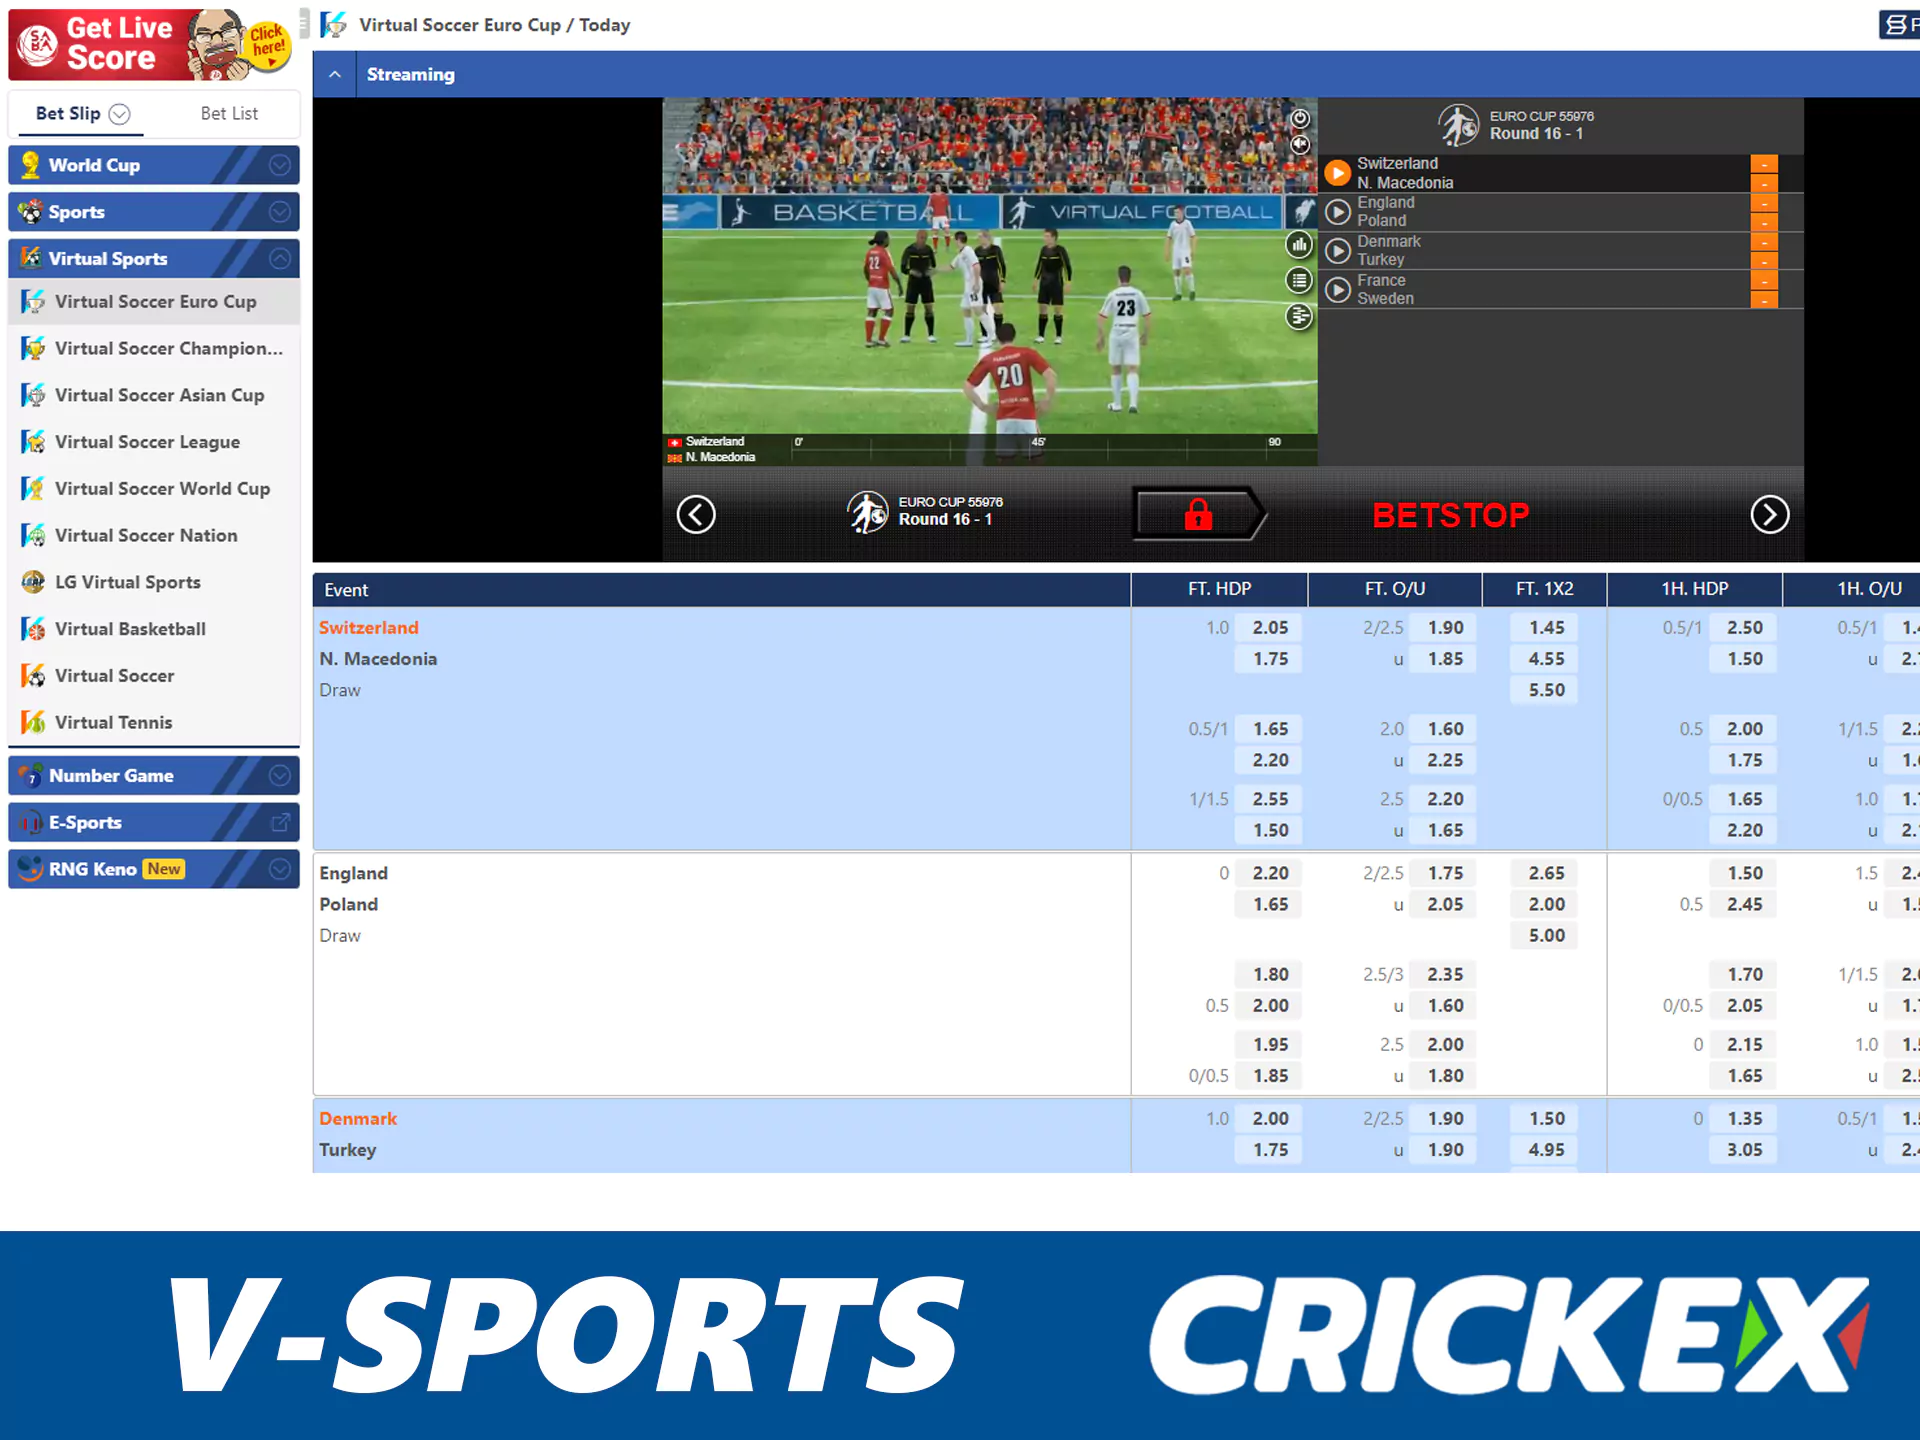 Watch vsports matches and bet at Crickex.